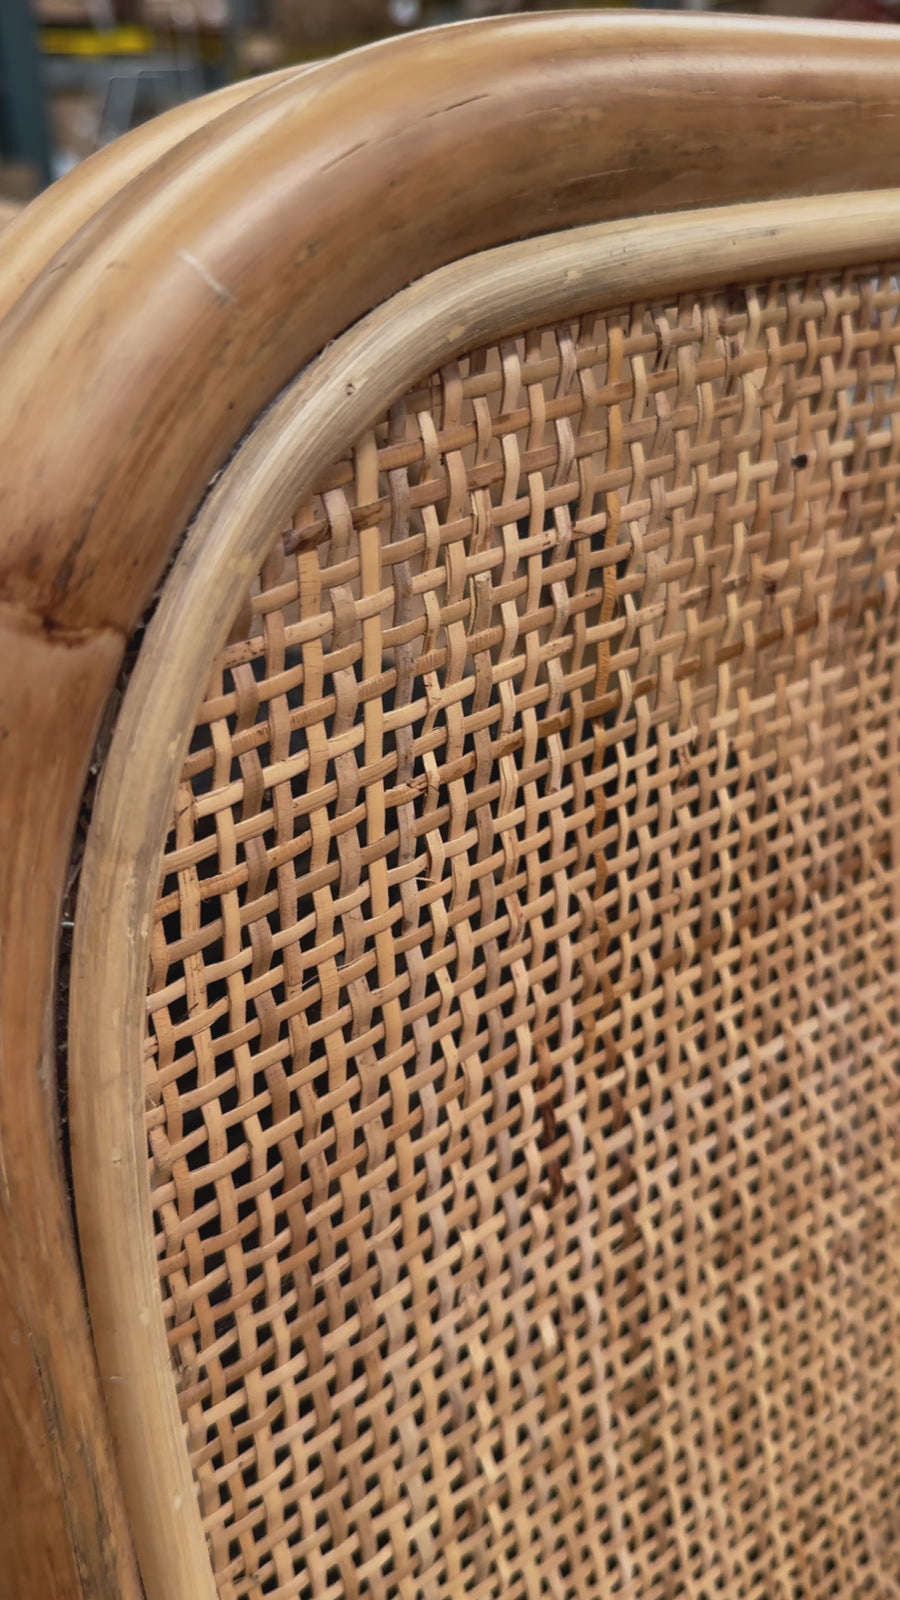 Imperfect Item |Sybella | Occasional Chair Natural Rattan